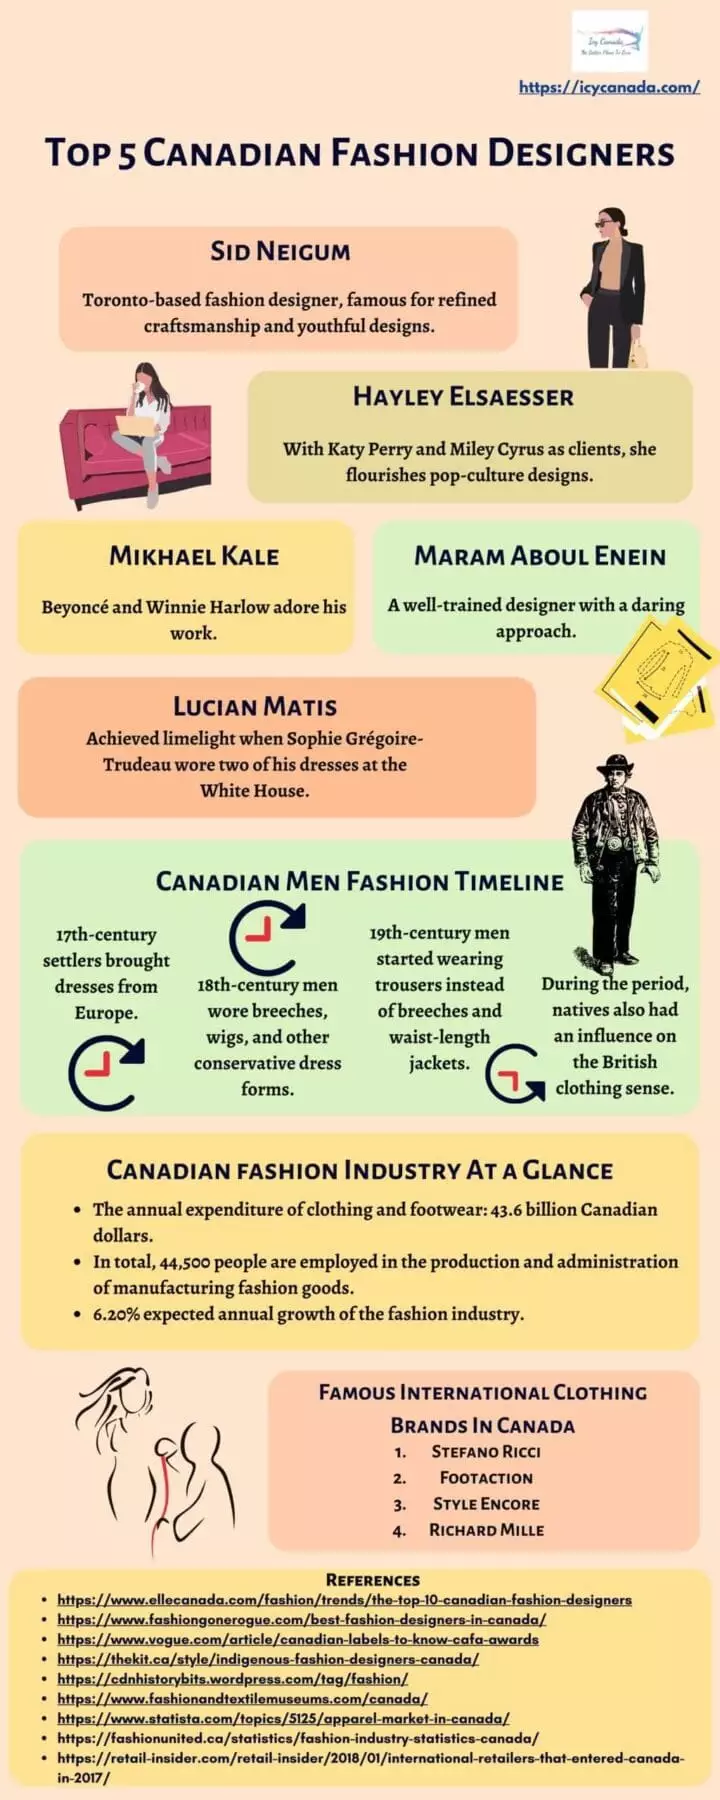 Cool Facts About Canadian Fashion Industry